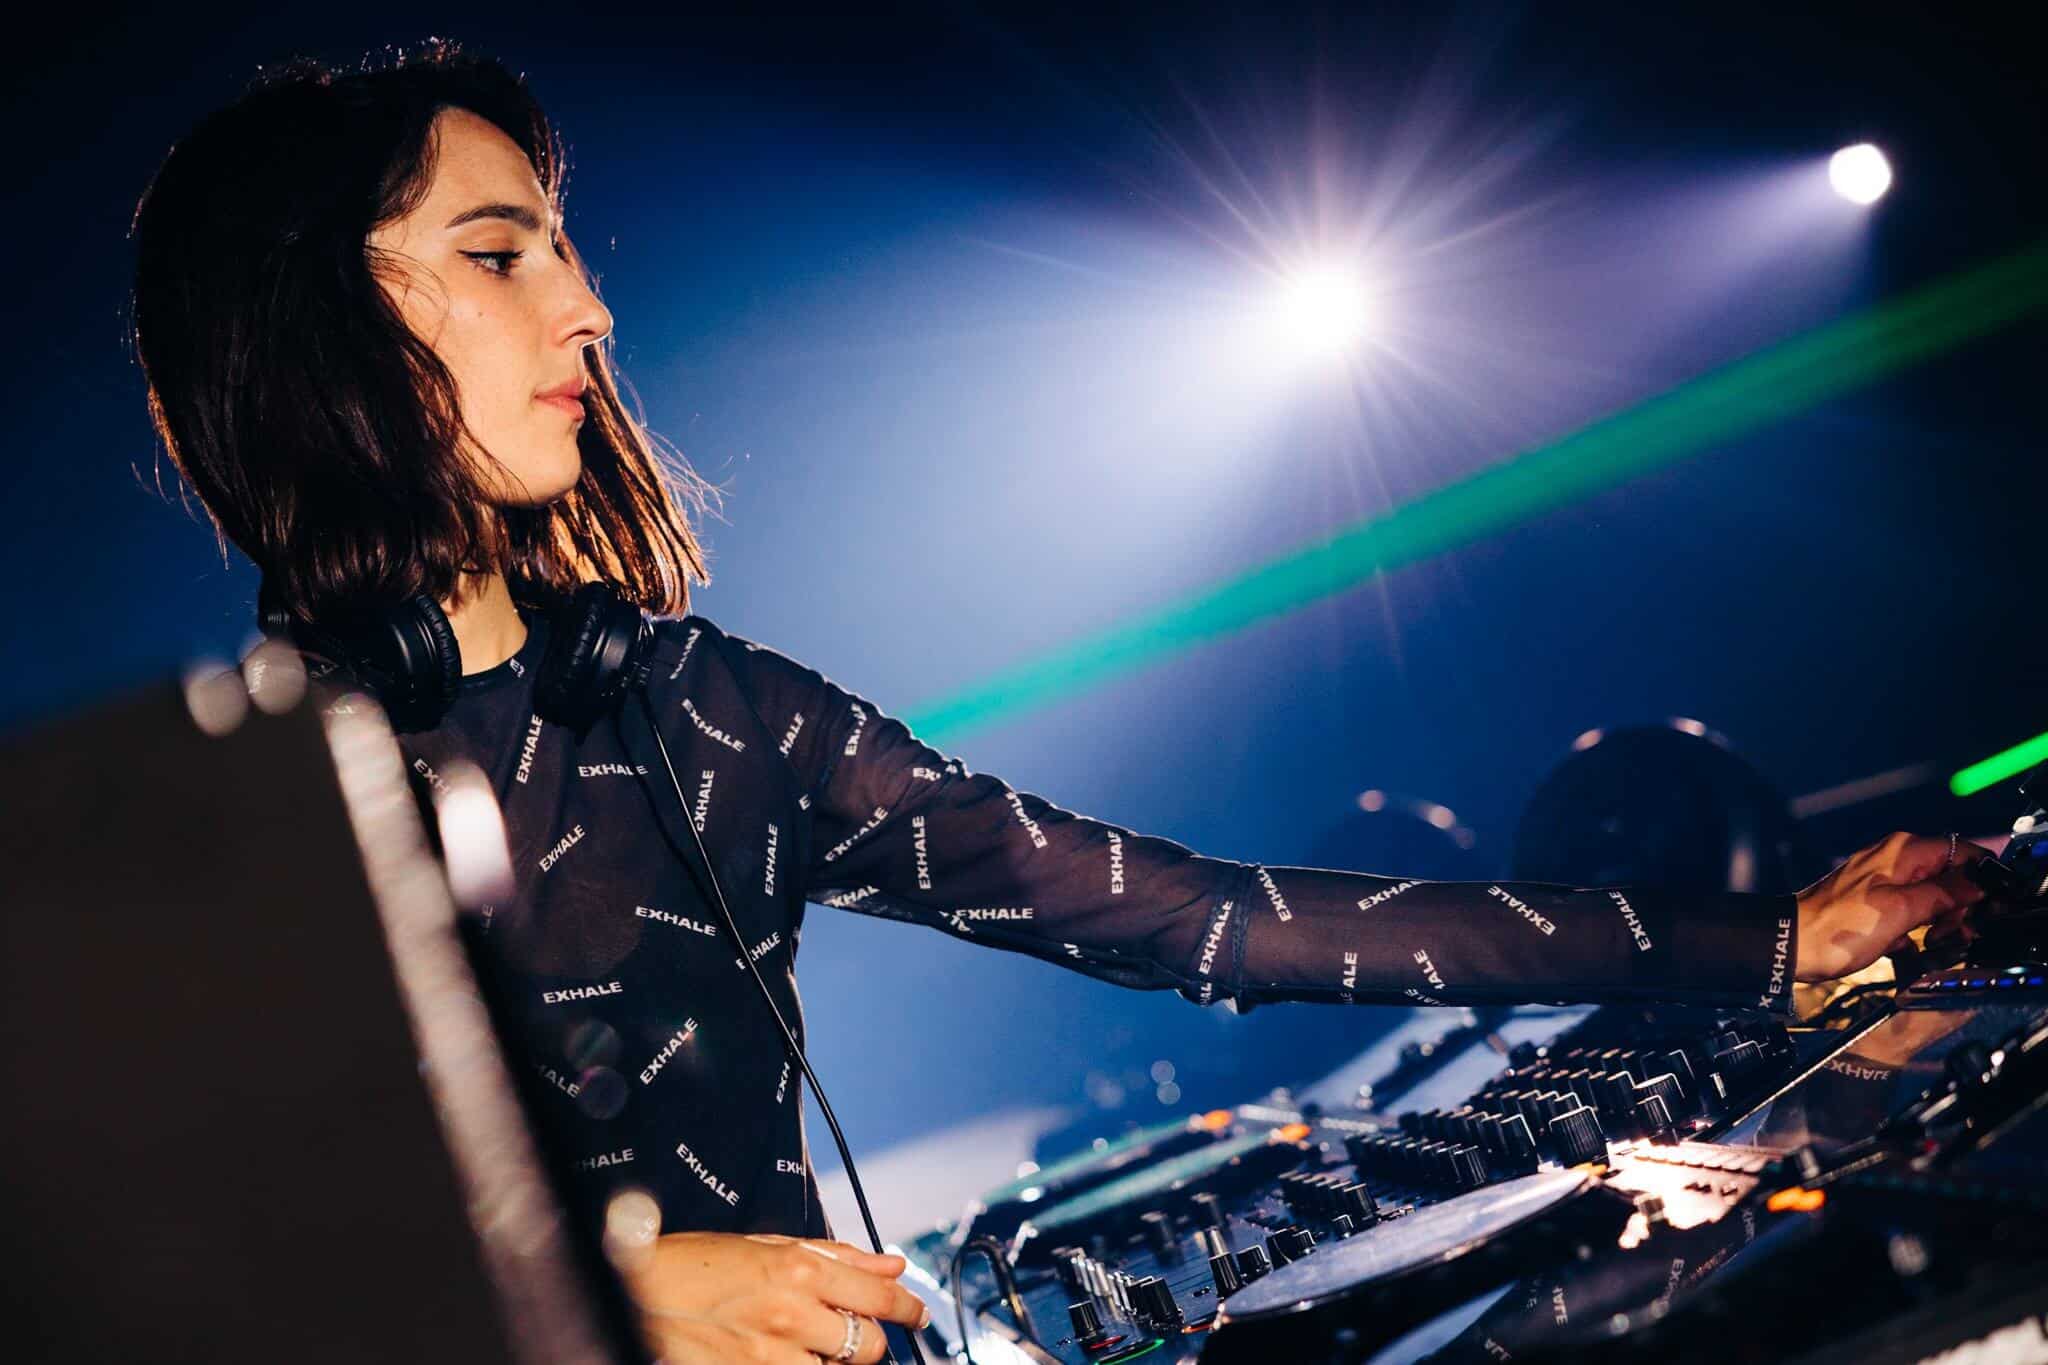 Amelie Lens drops epic mix at her BBC Radio 1 residency